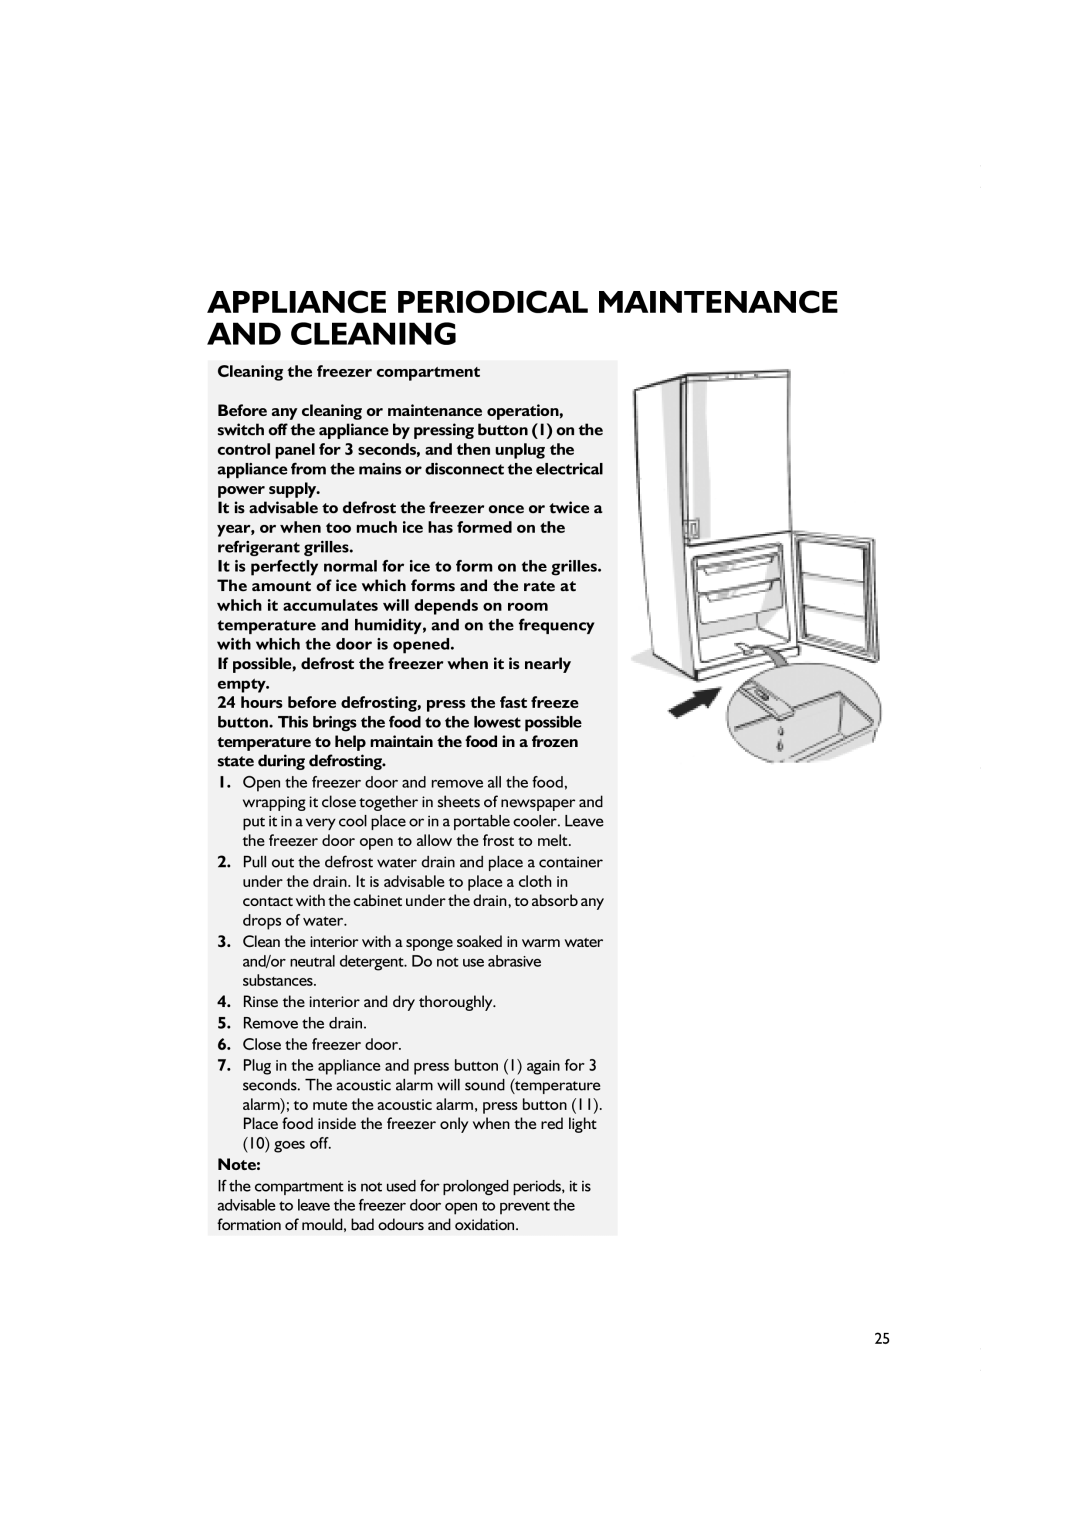 Smeg CR328AZD7, CR328APZD manual Appliance Periodical Maintenance And Cleaning, Cleaning the freezer compartment 